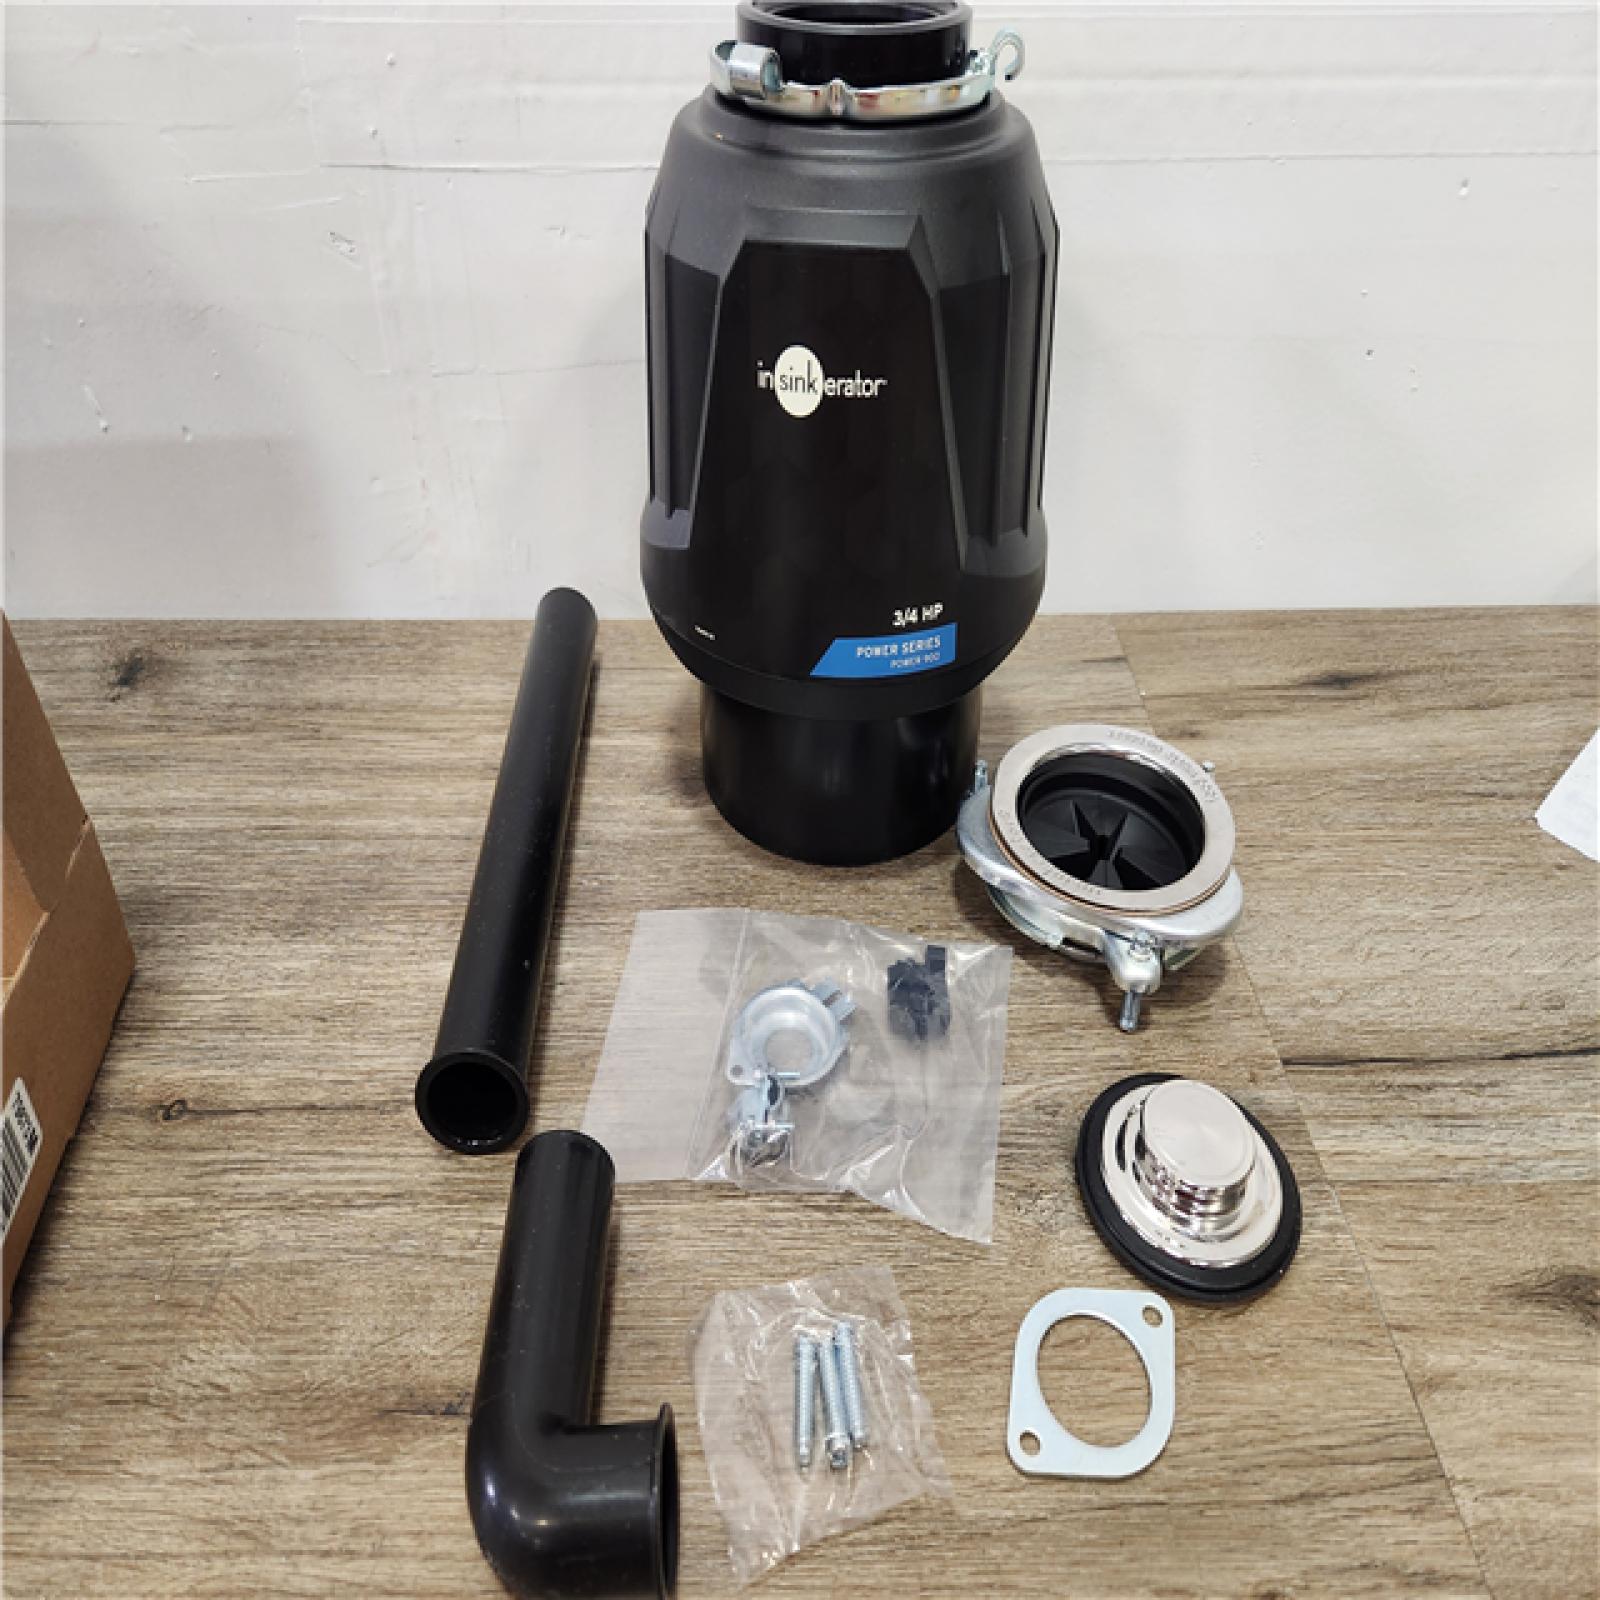 Phoenix Location NEW InSinkErator Power 900, 3/4 HP Garbage Disposal, Continuous Feed Food Waste Disposer with EZ Connect Power Cord Kit